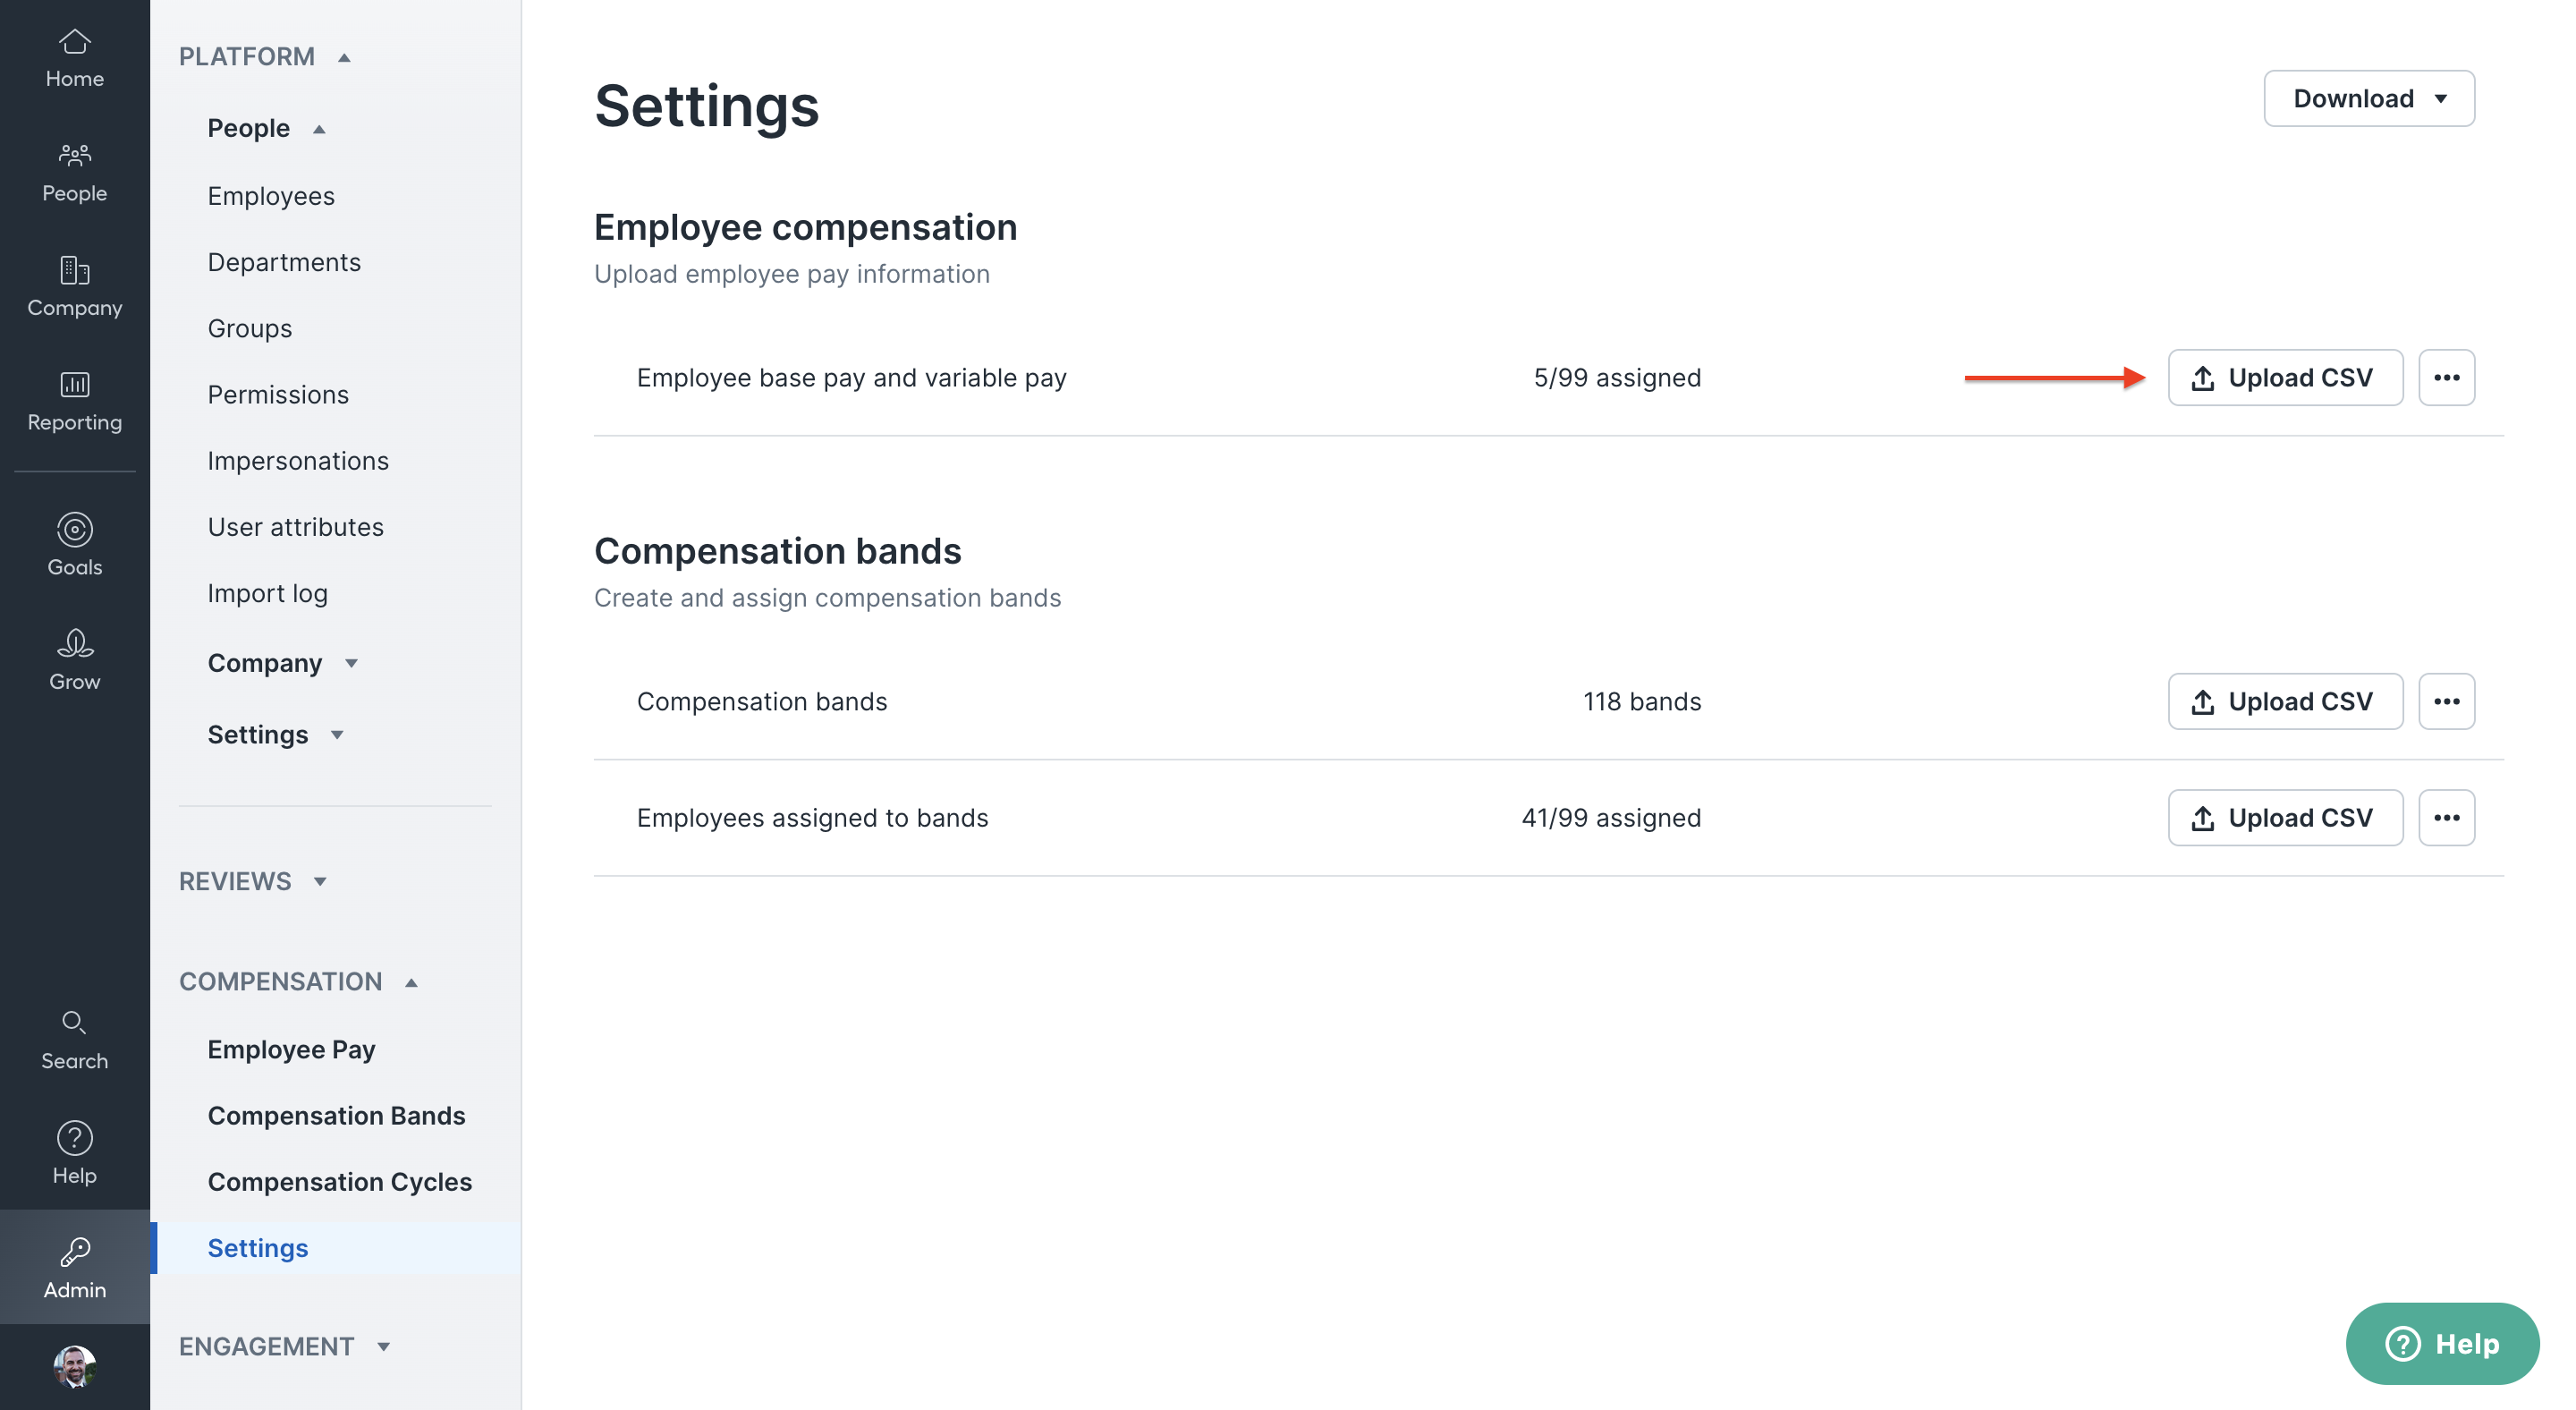 Image of Compensation Settings page with a red arrow highlighting the Upload CSV button